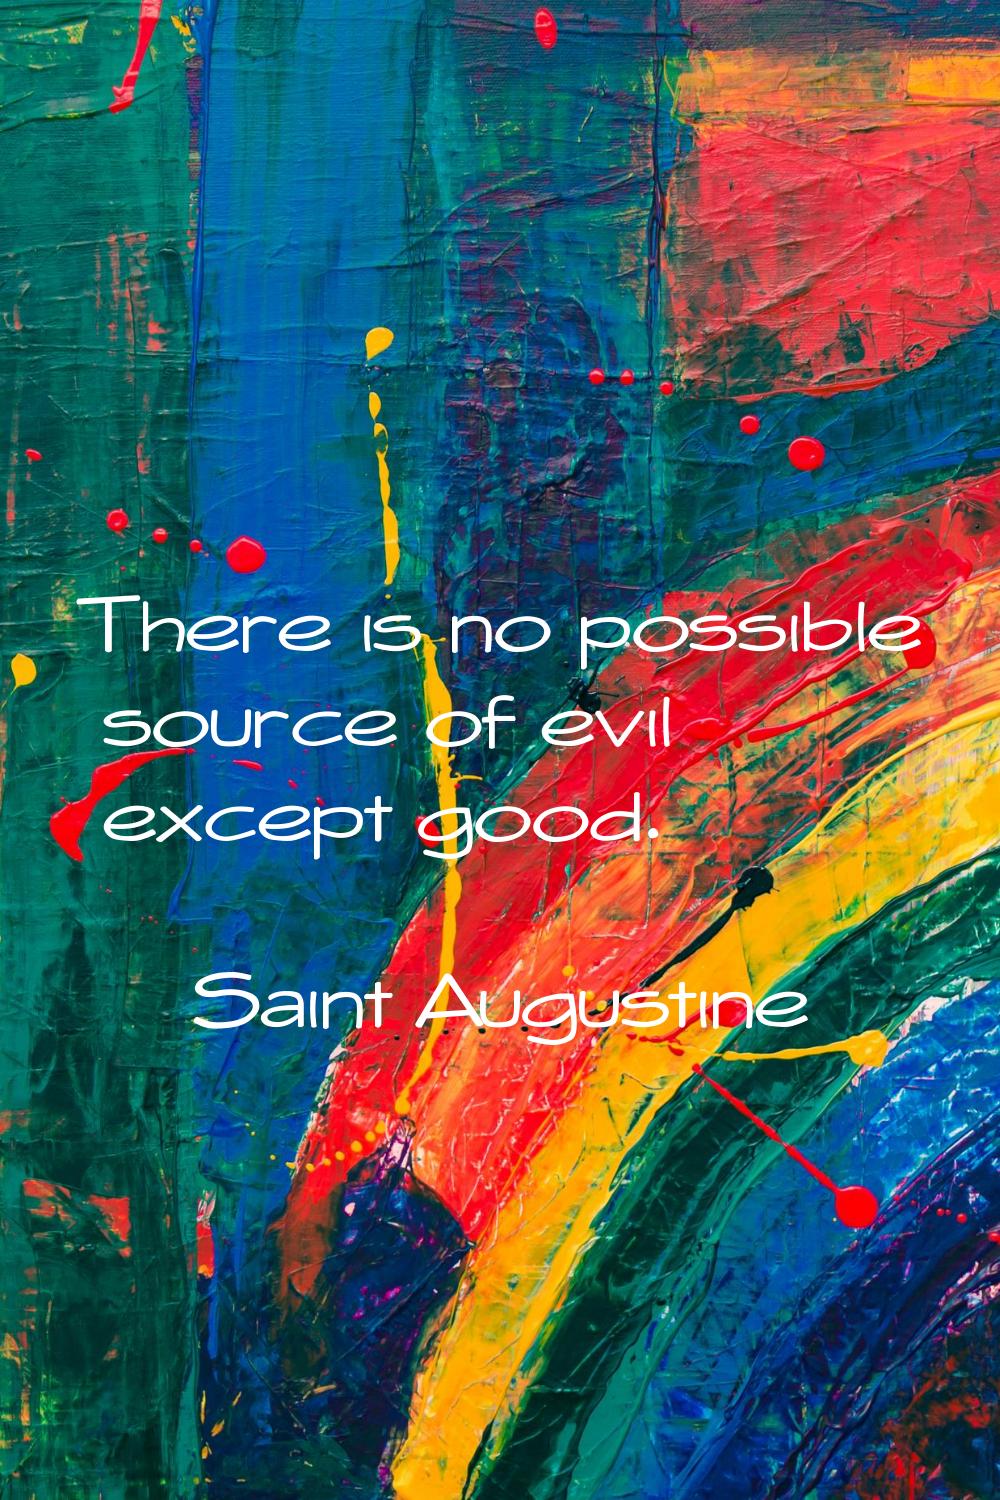 There is no possible source of evil except good.